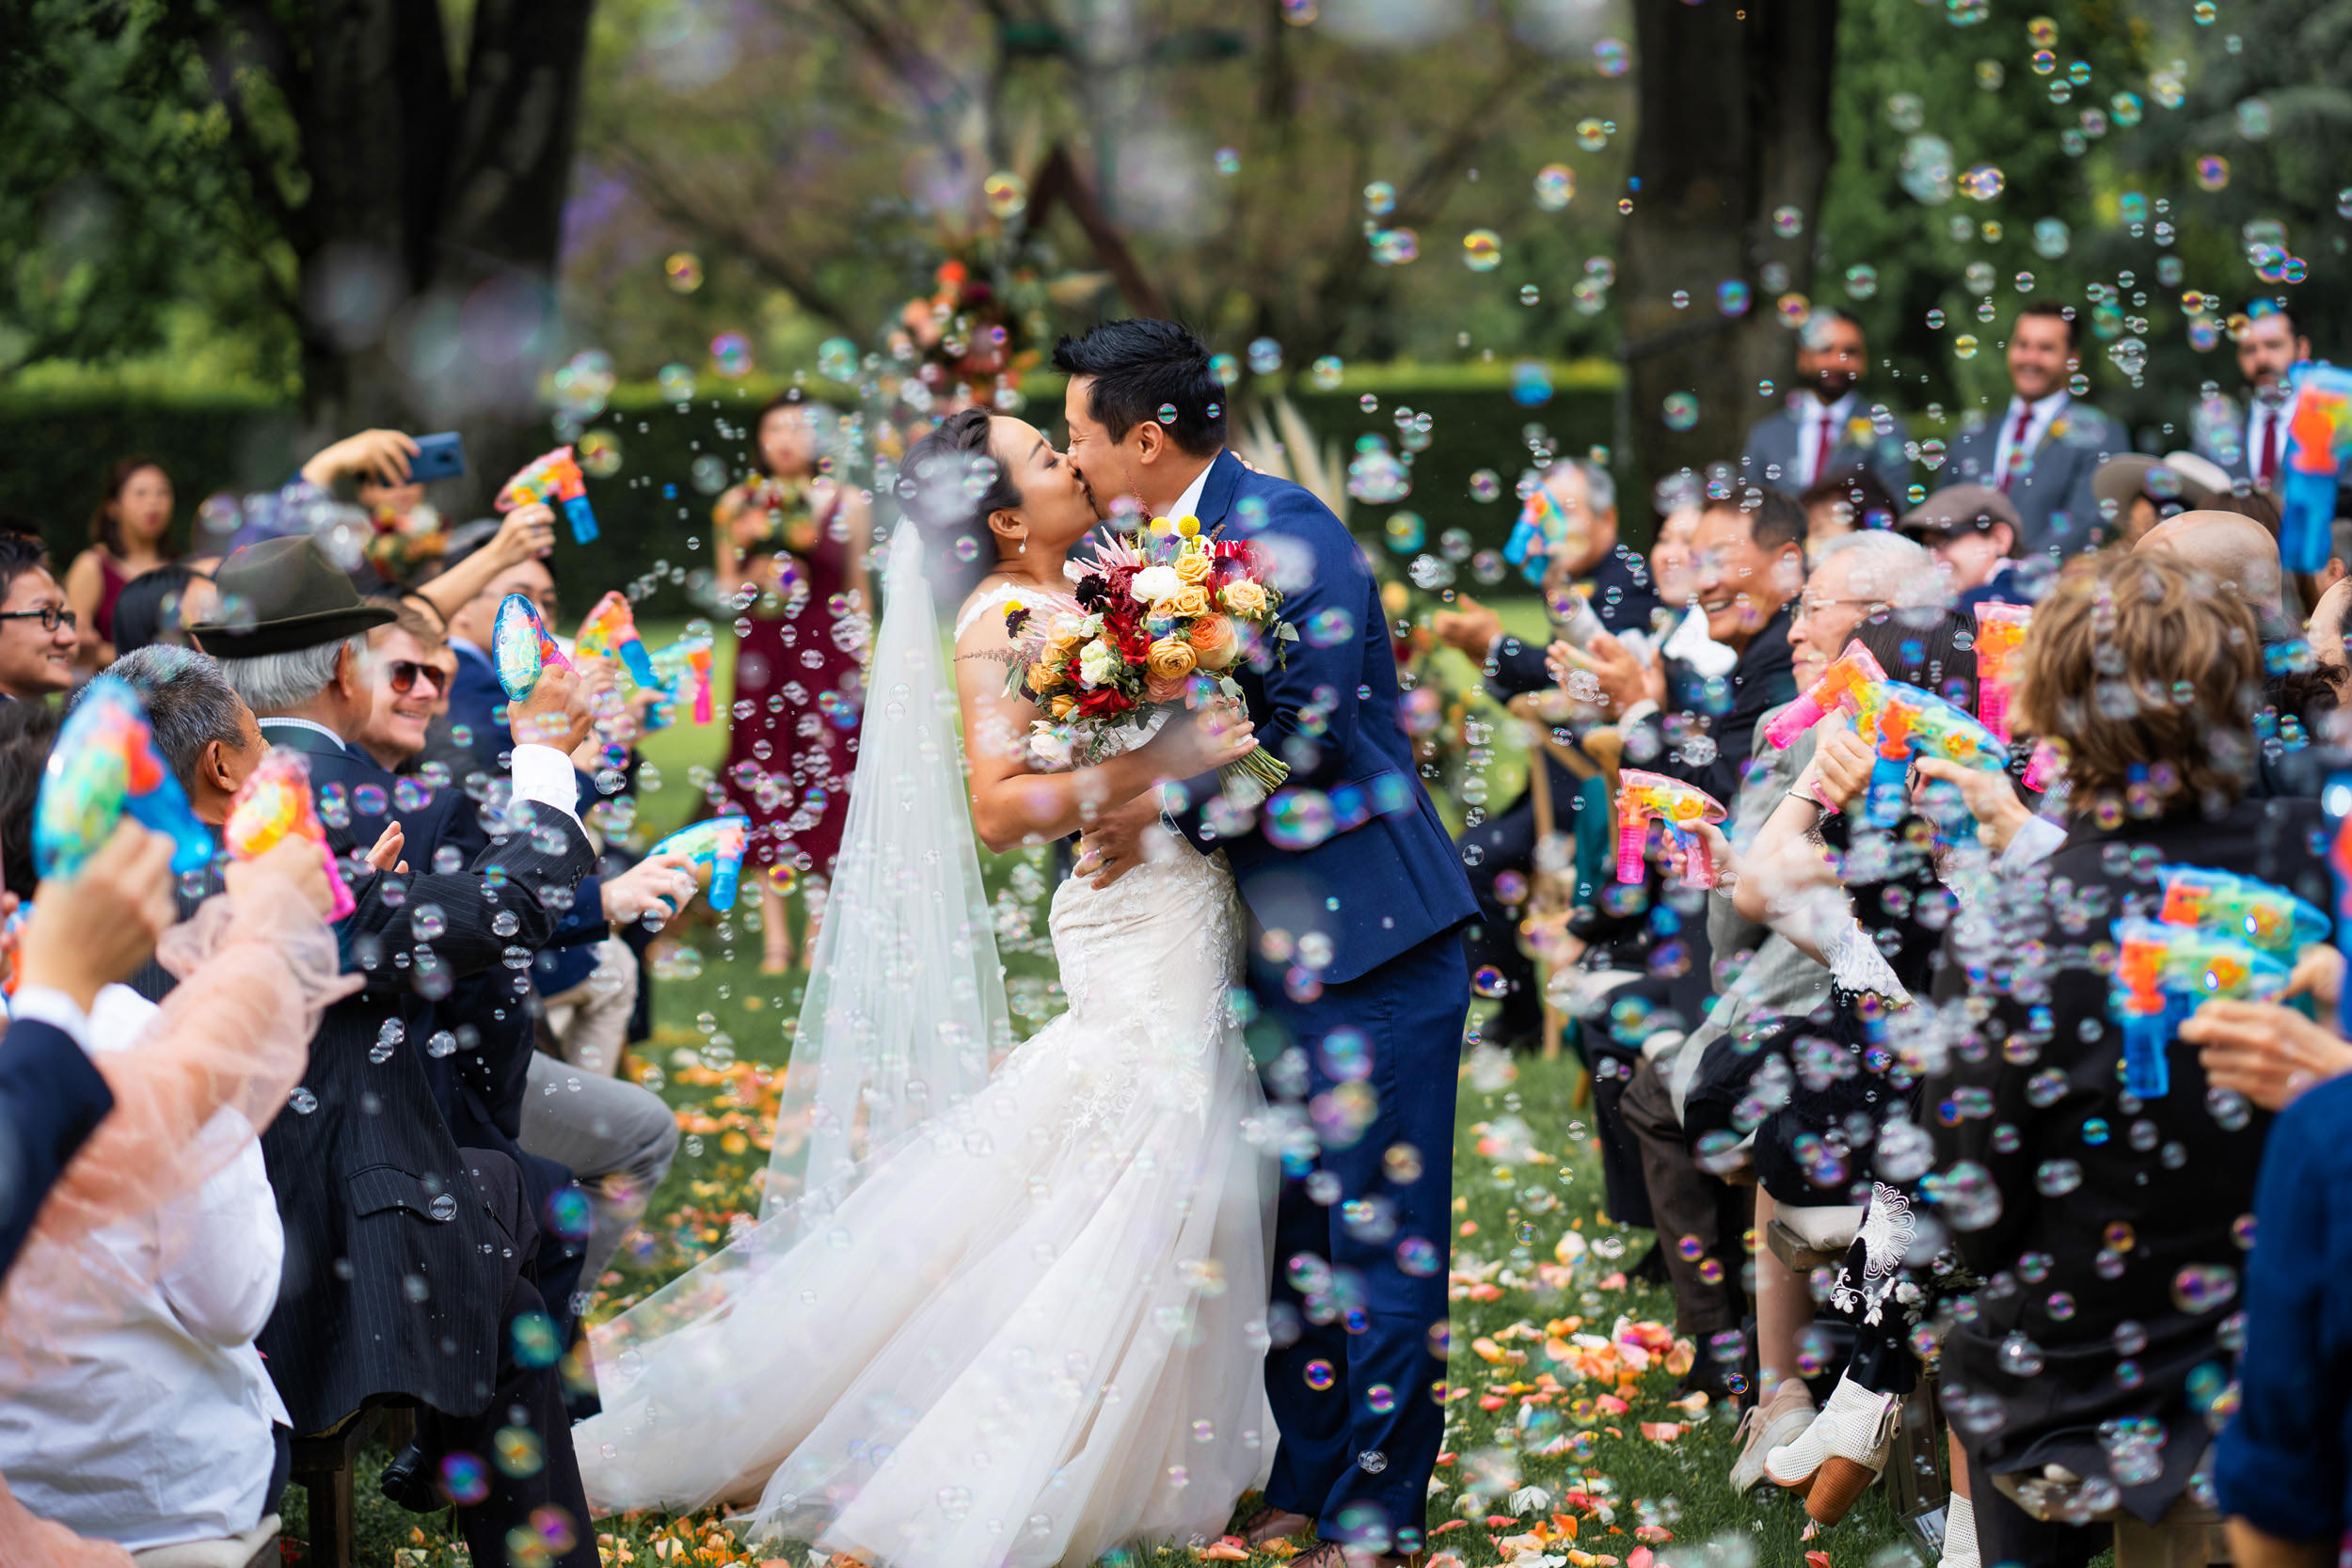 wedding photograph of bride and groom kissing with guests showering them with bubbles after their ceremony